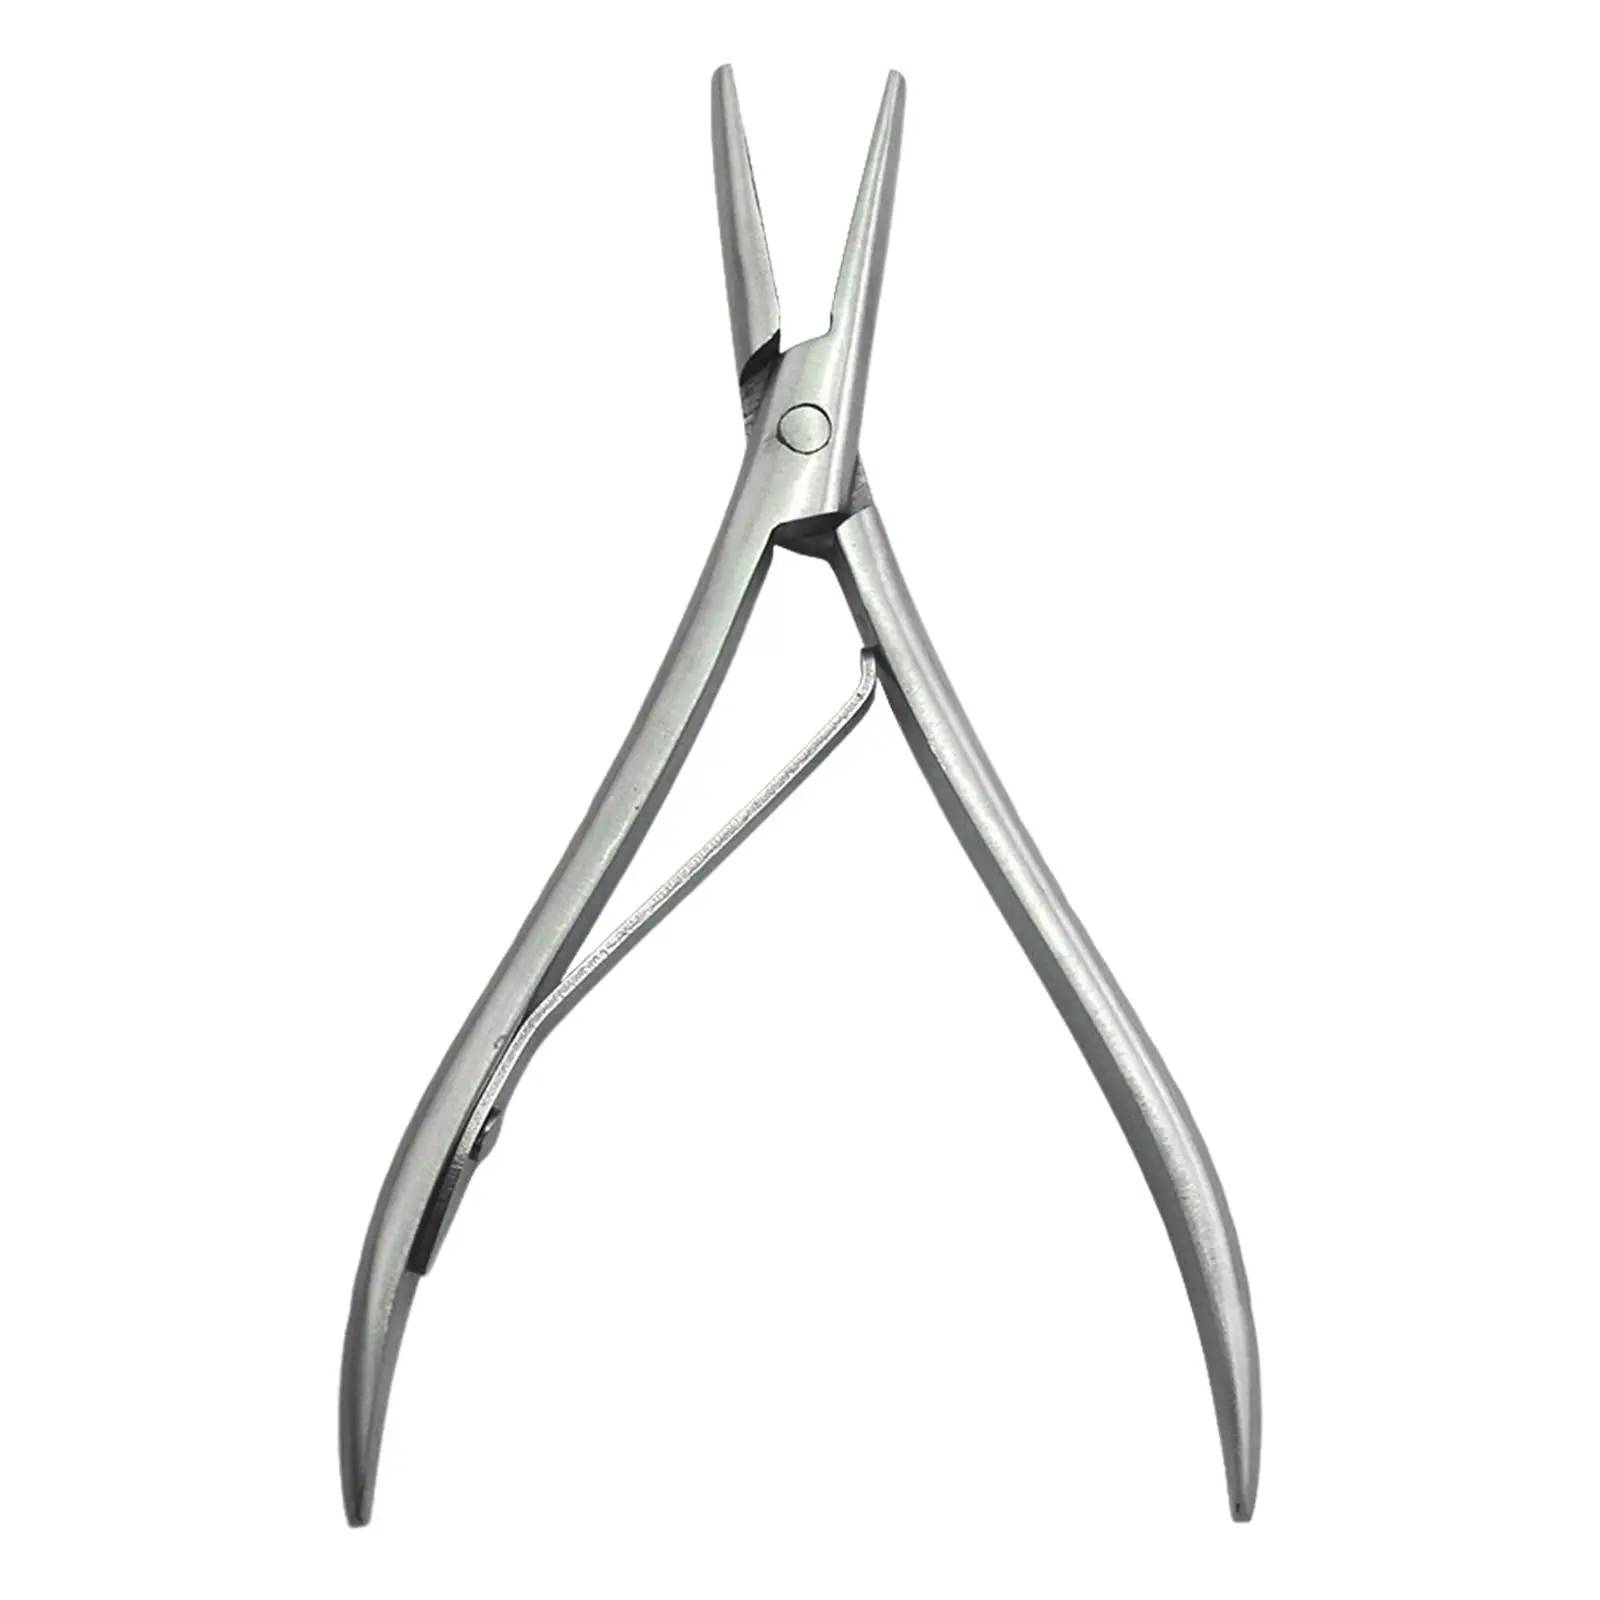 Hair Extension Pliers, Hair Extension Tools Flat Shape, Multi Functional Clamp Pliers Tool for Hair Extension